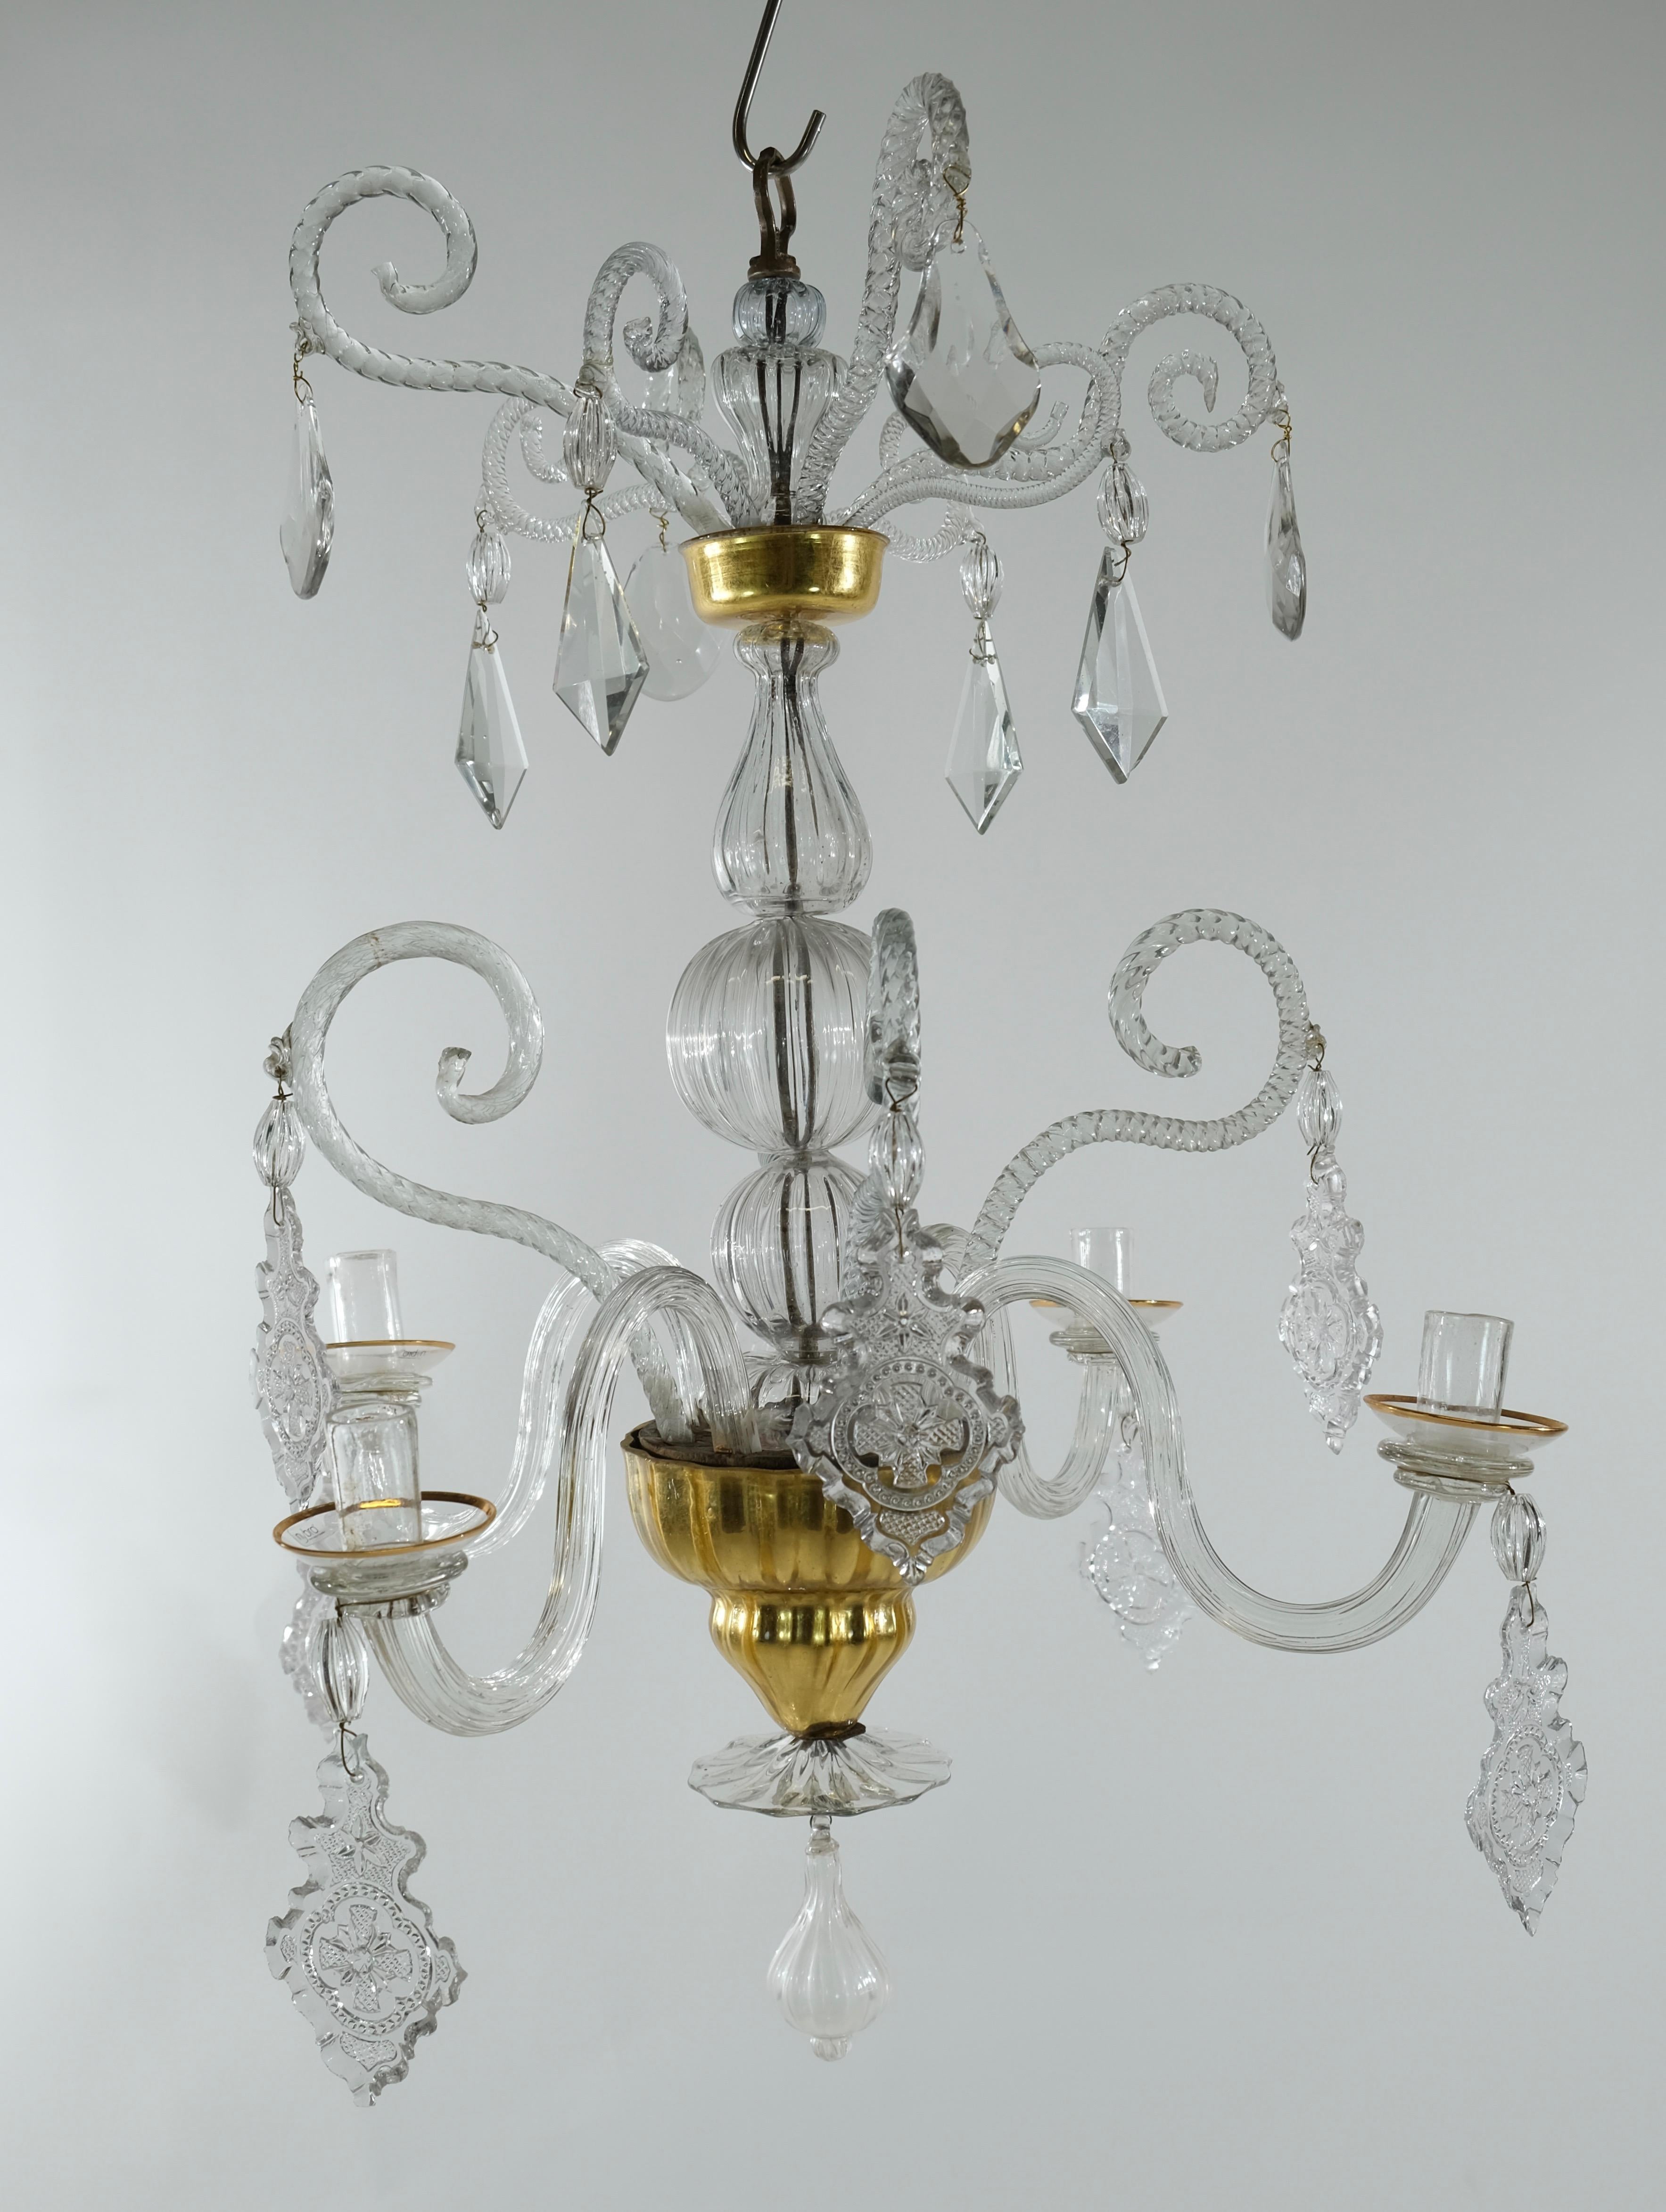 A charming Bohemian small four-armed chandelier. A forged iron rod holds all of the chandeliers different glass parts. Central are handblown 